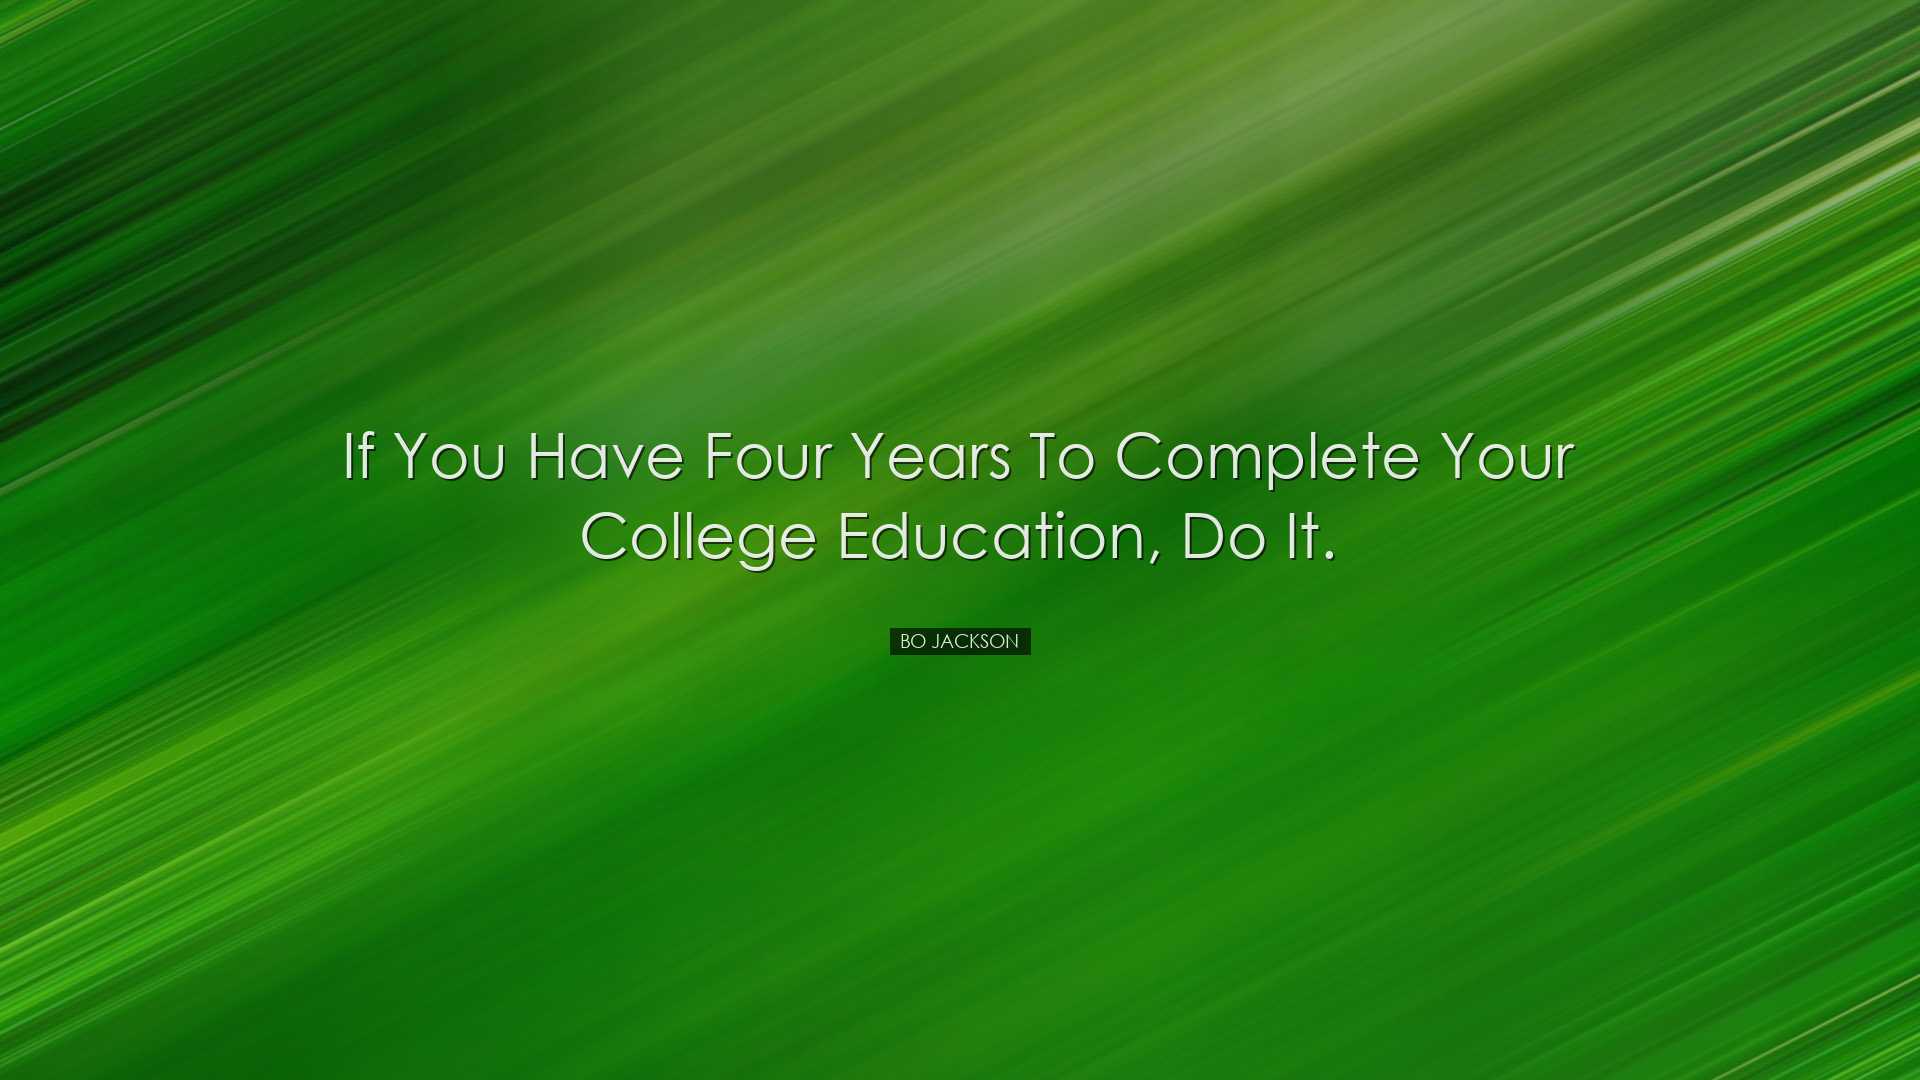 If you have four years to complete your college education, do it.